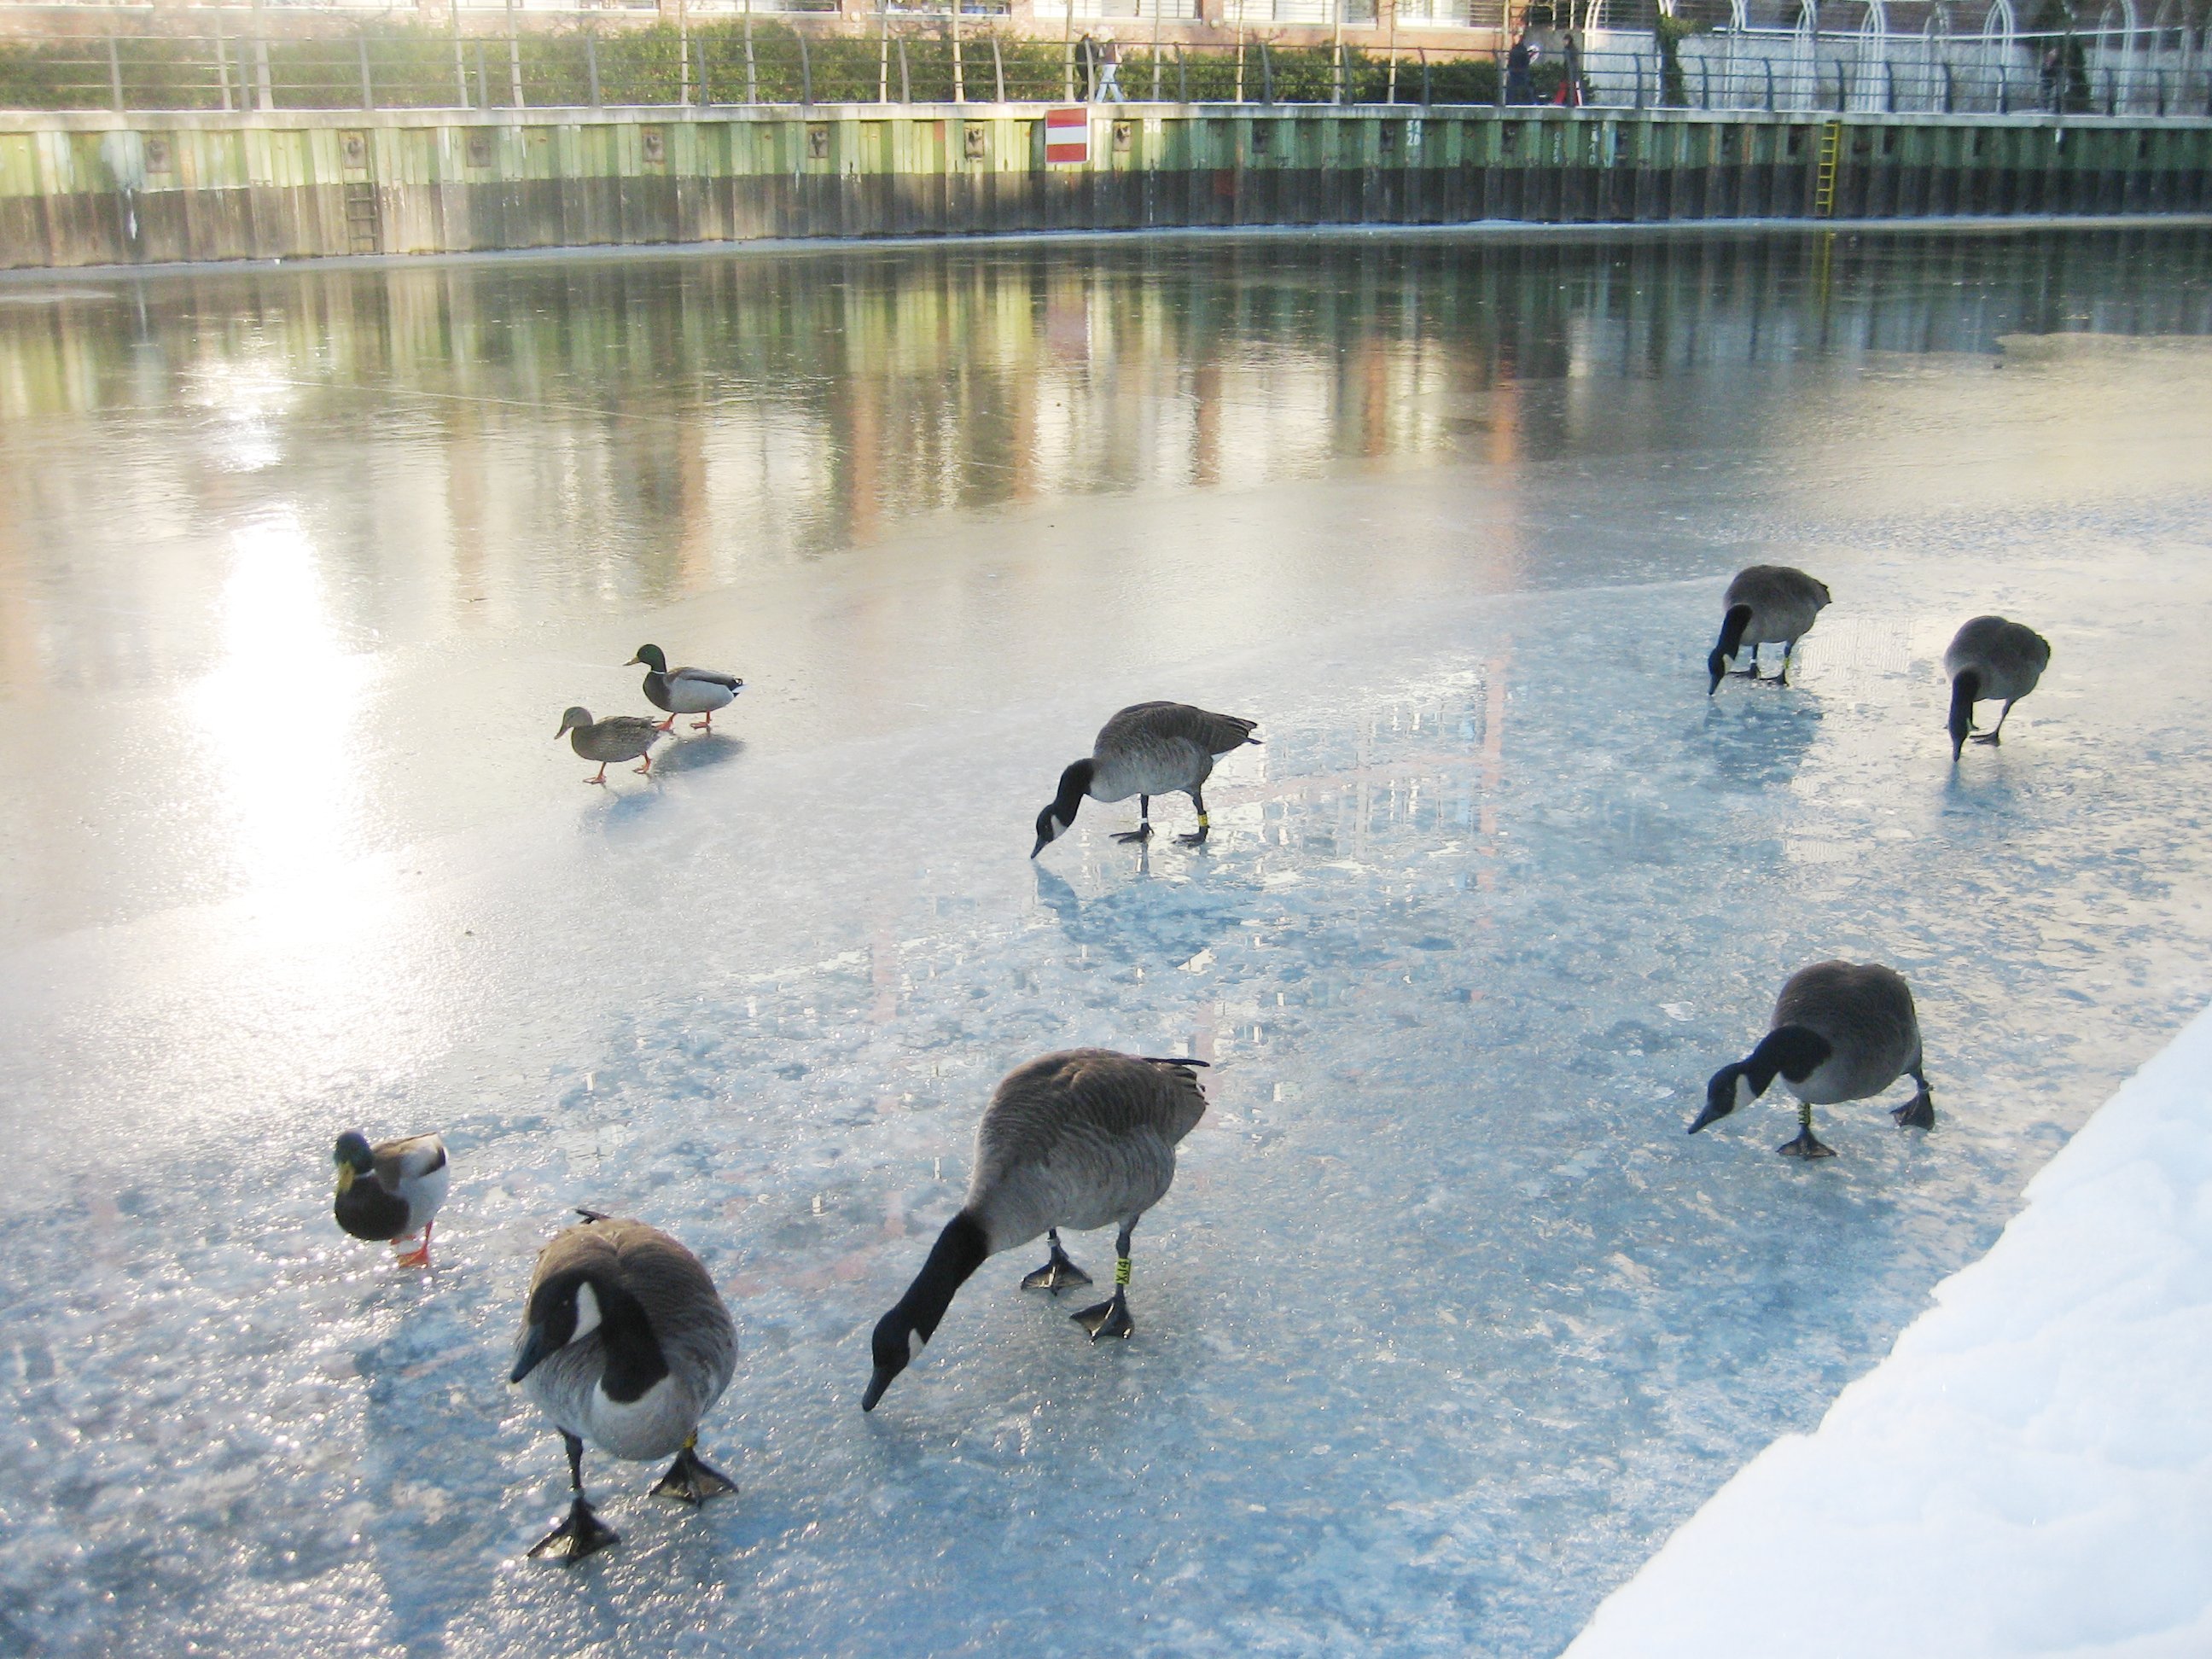 File:Swarm of Canada geese in winter.jpg - Wikimedia Commons